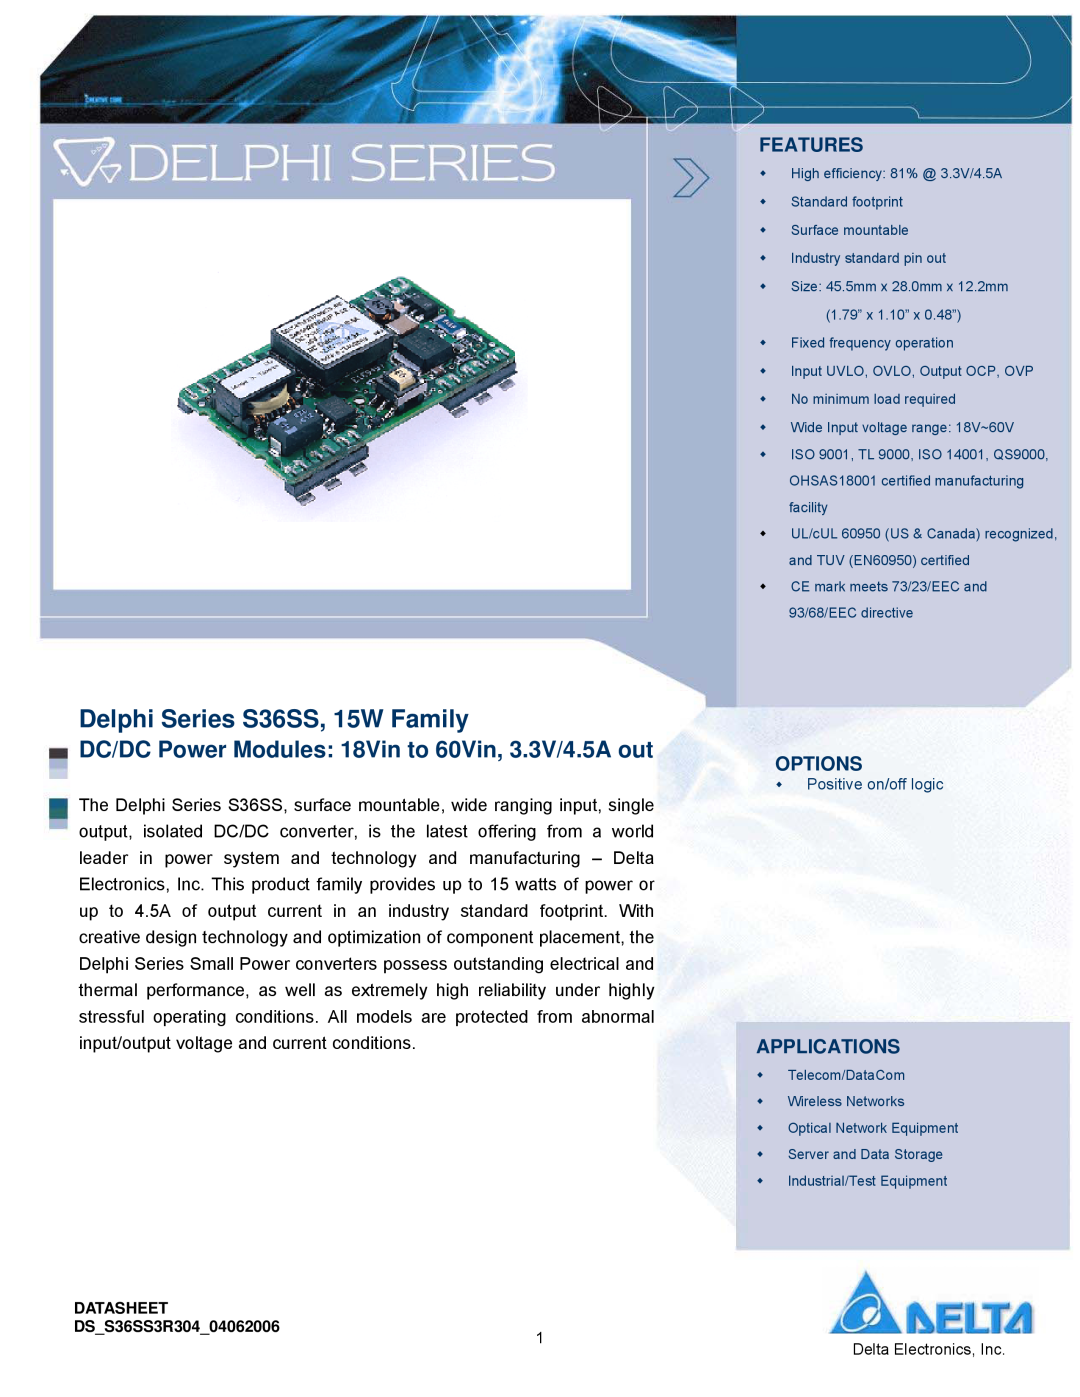 Delta Electronics manual Delphi Series S36SS, 15W Family, Features, Options, Applications 